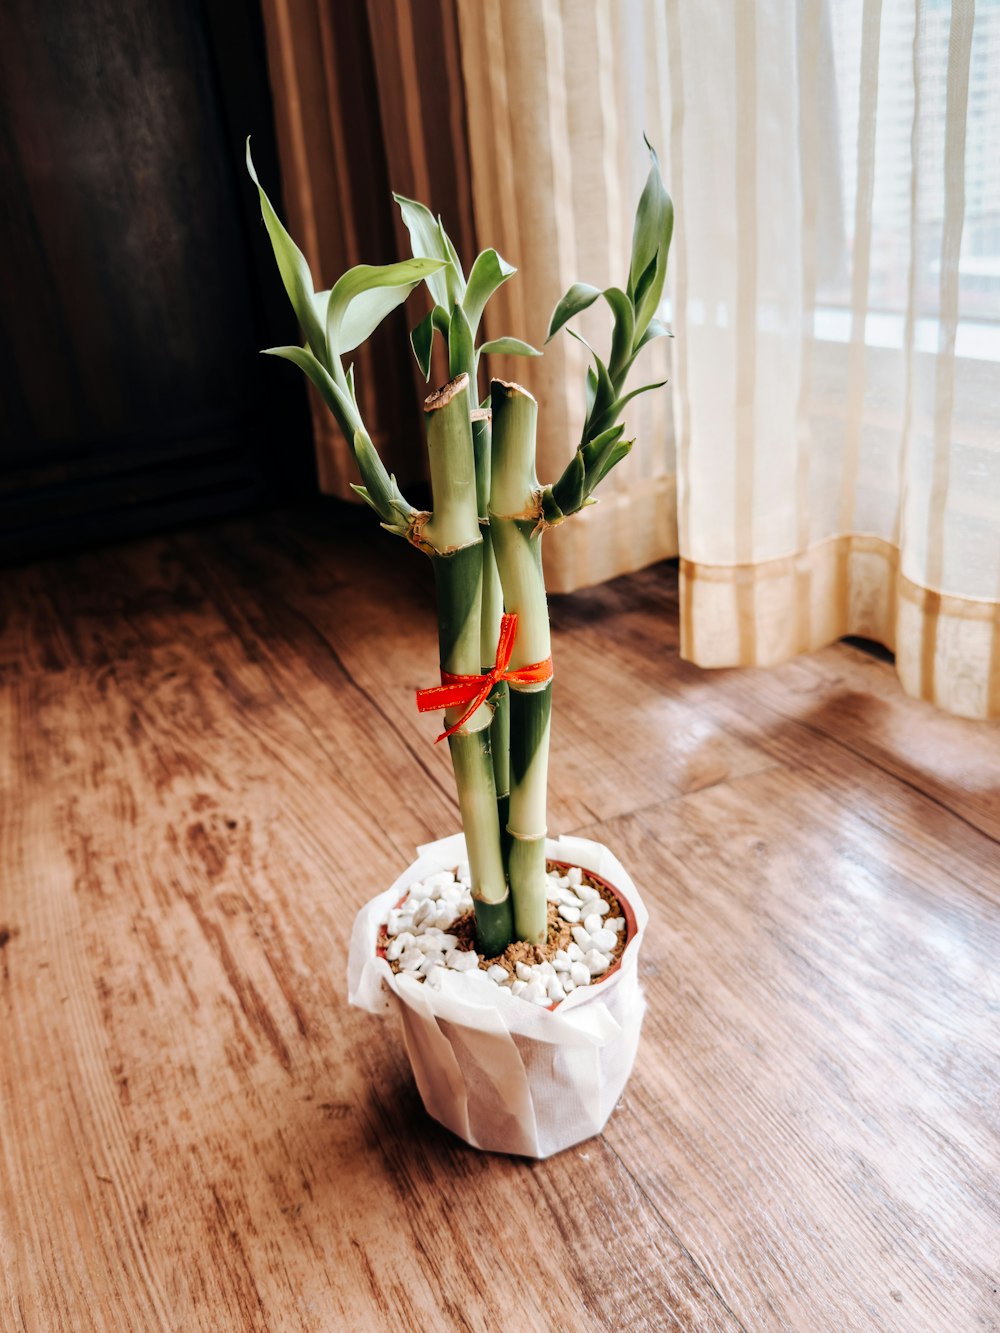 a bamboo plant in a pot on a wooden floor